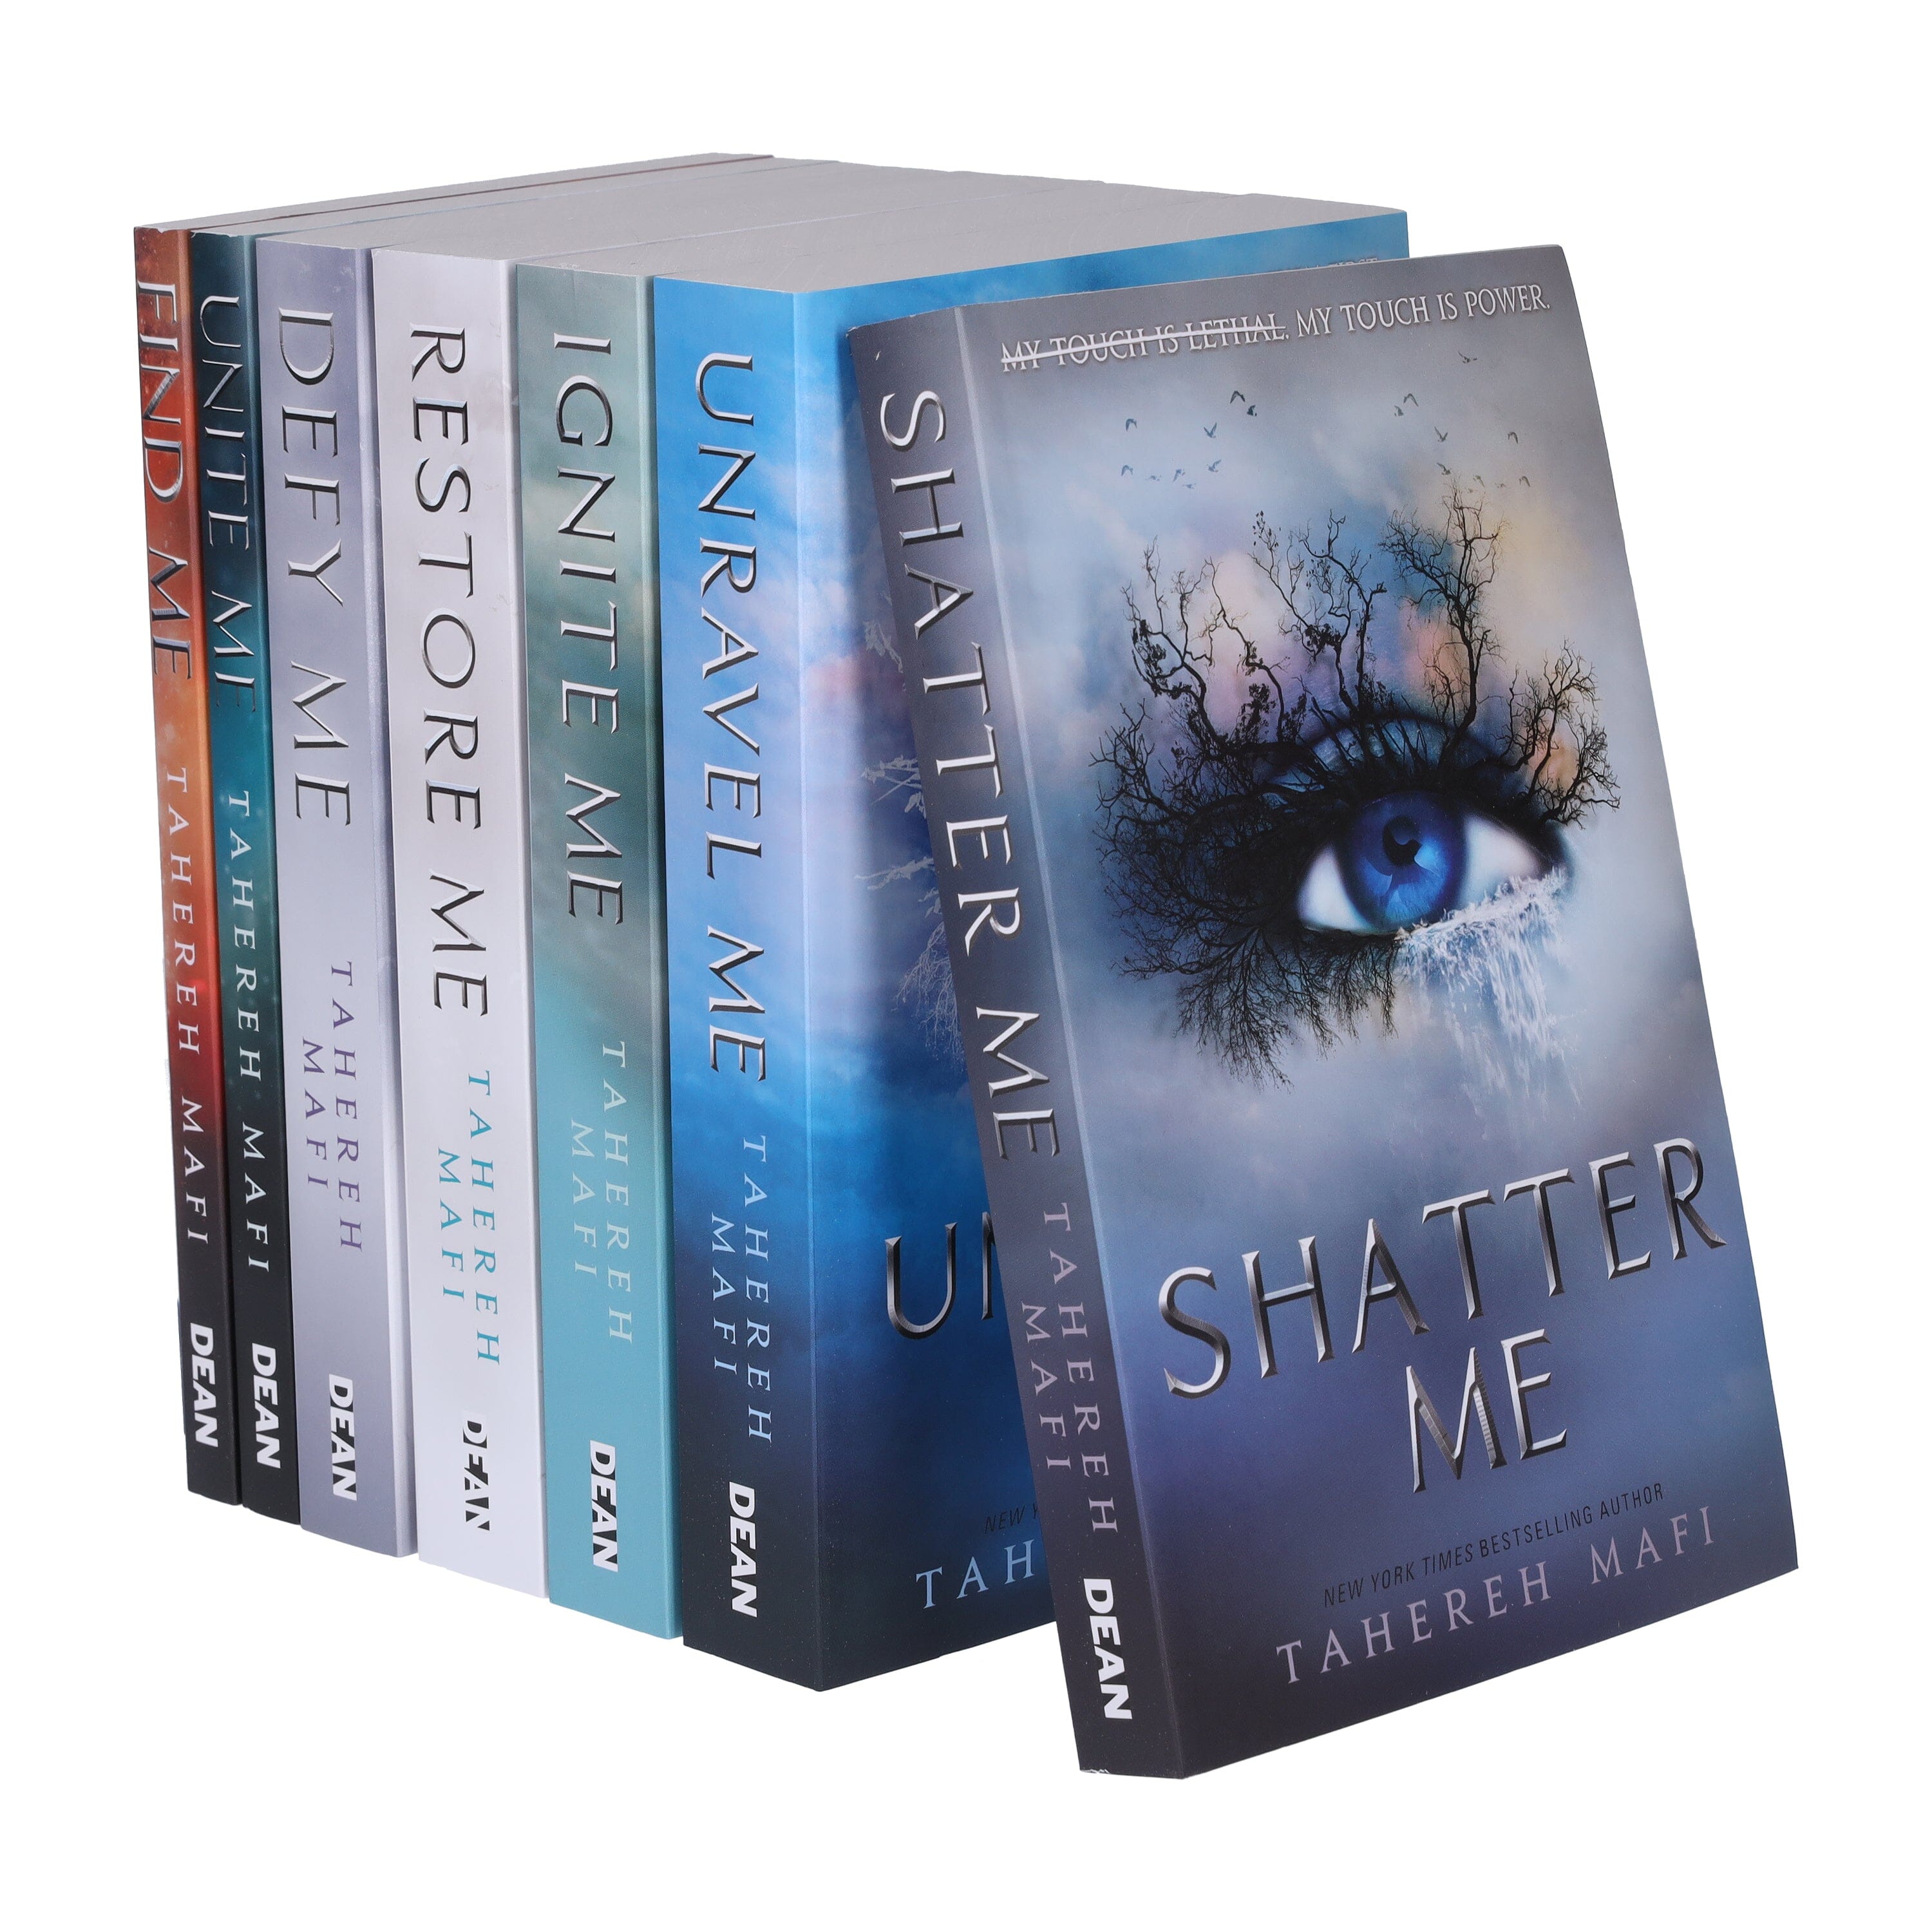 All the Shatter Me Books in Order